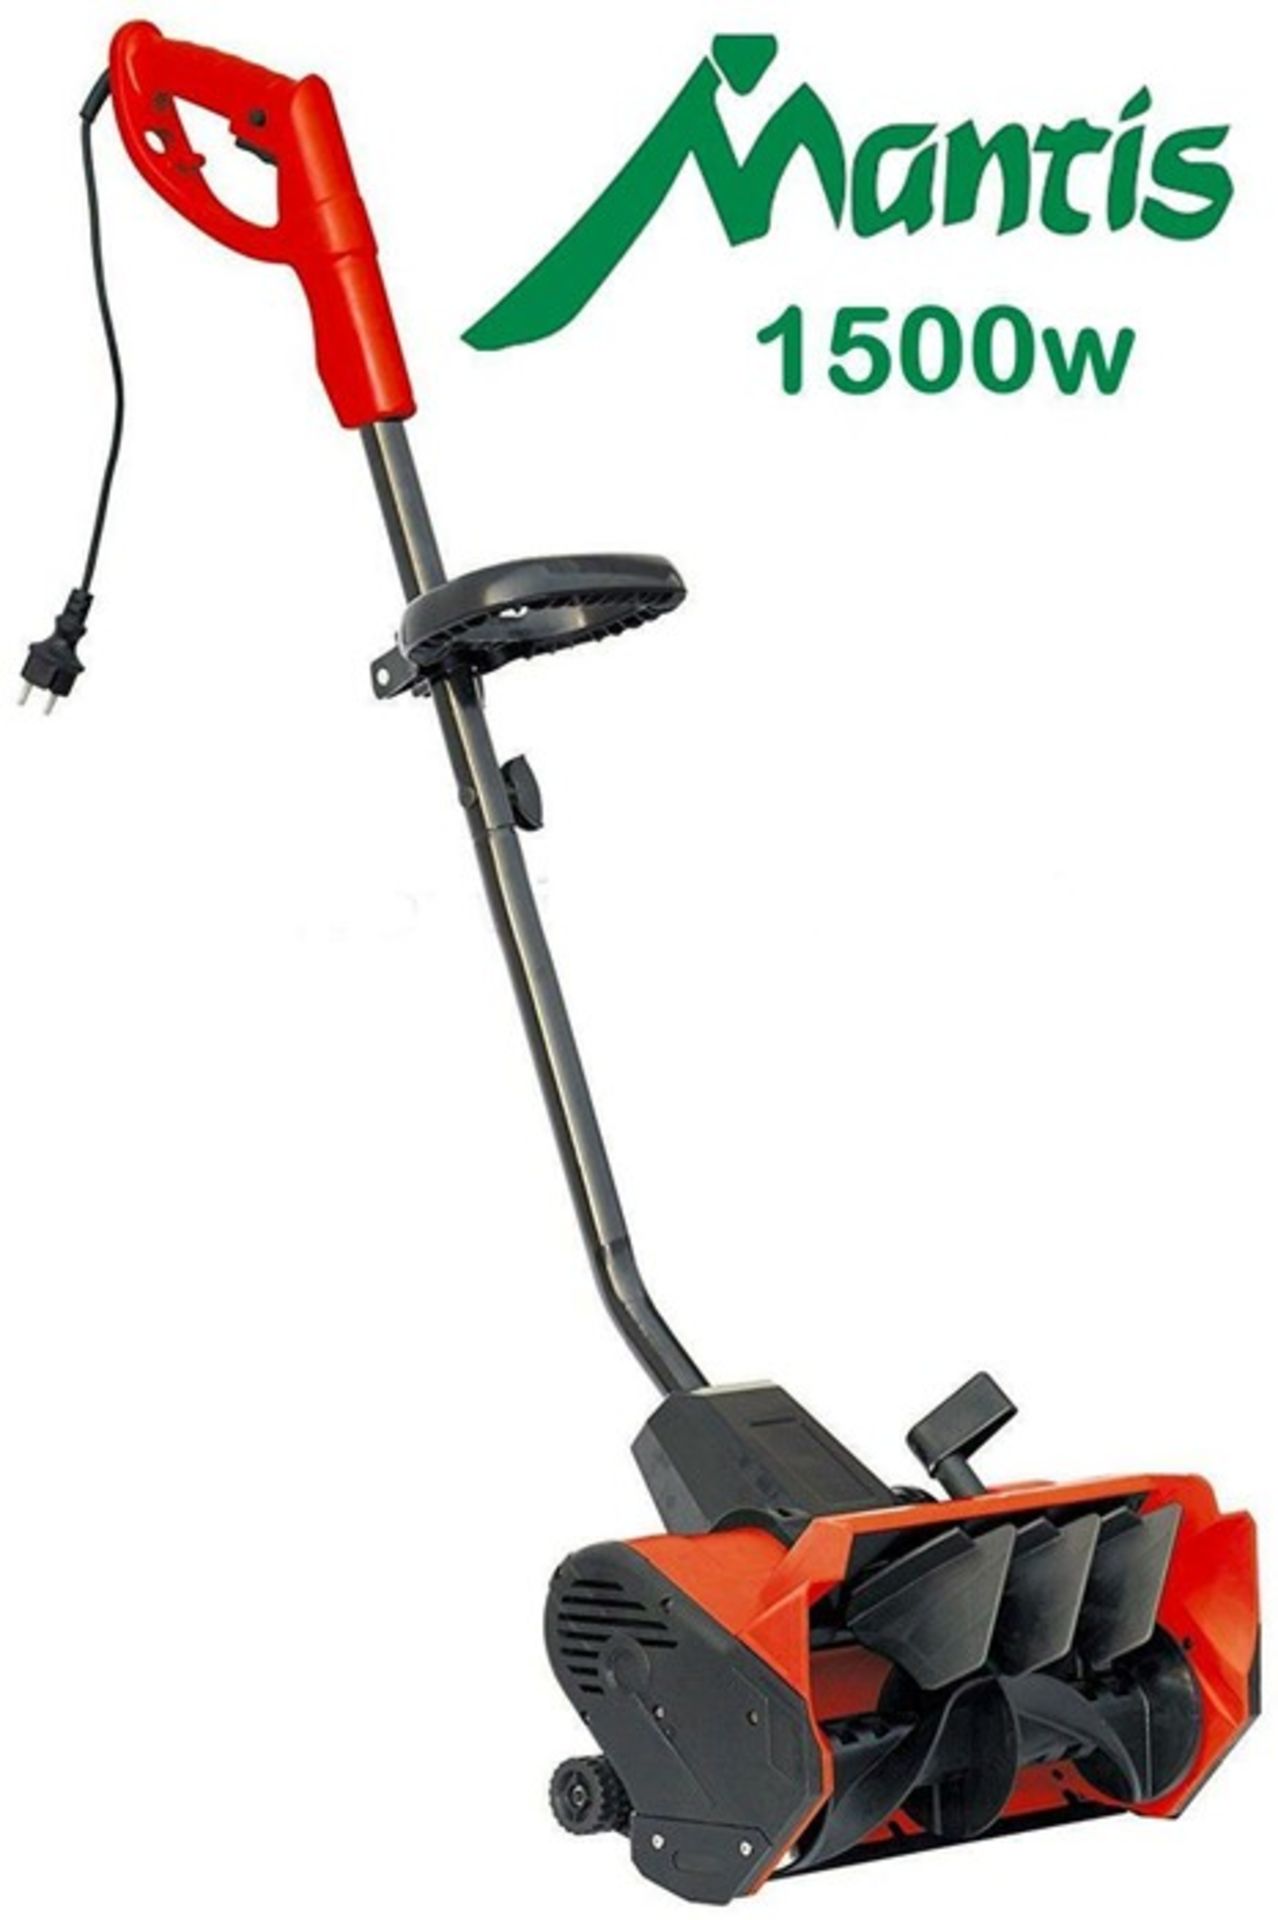 Mantis IM8110 Snow Shovel BRAND NEW and Boxed RRP £69.99  Features include~:    Lightweight,